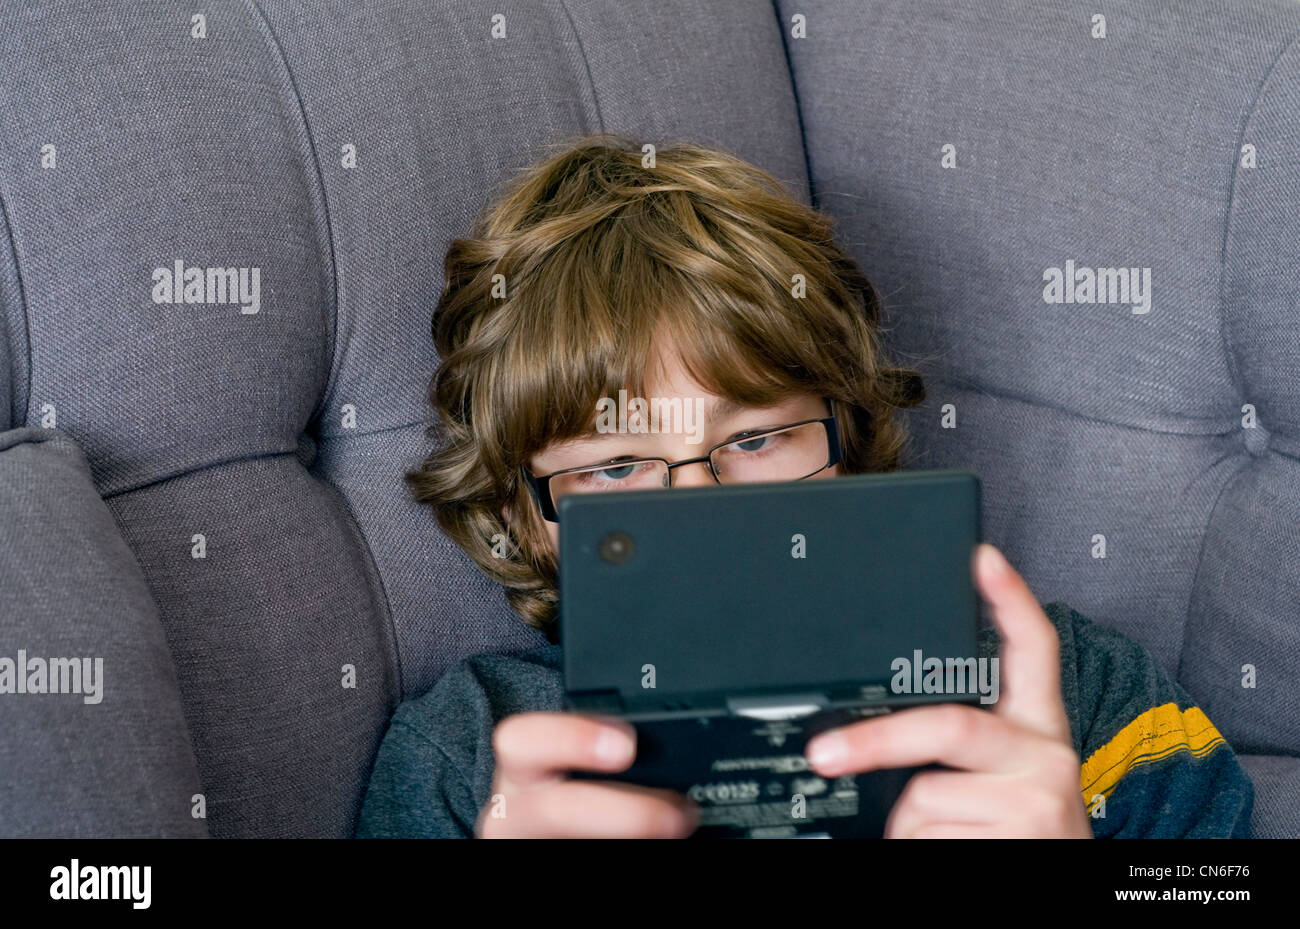 A boy playing on a hand-held Nintendo DSi games console Stock Photo